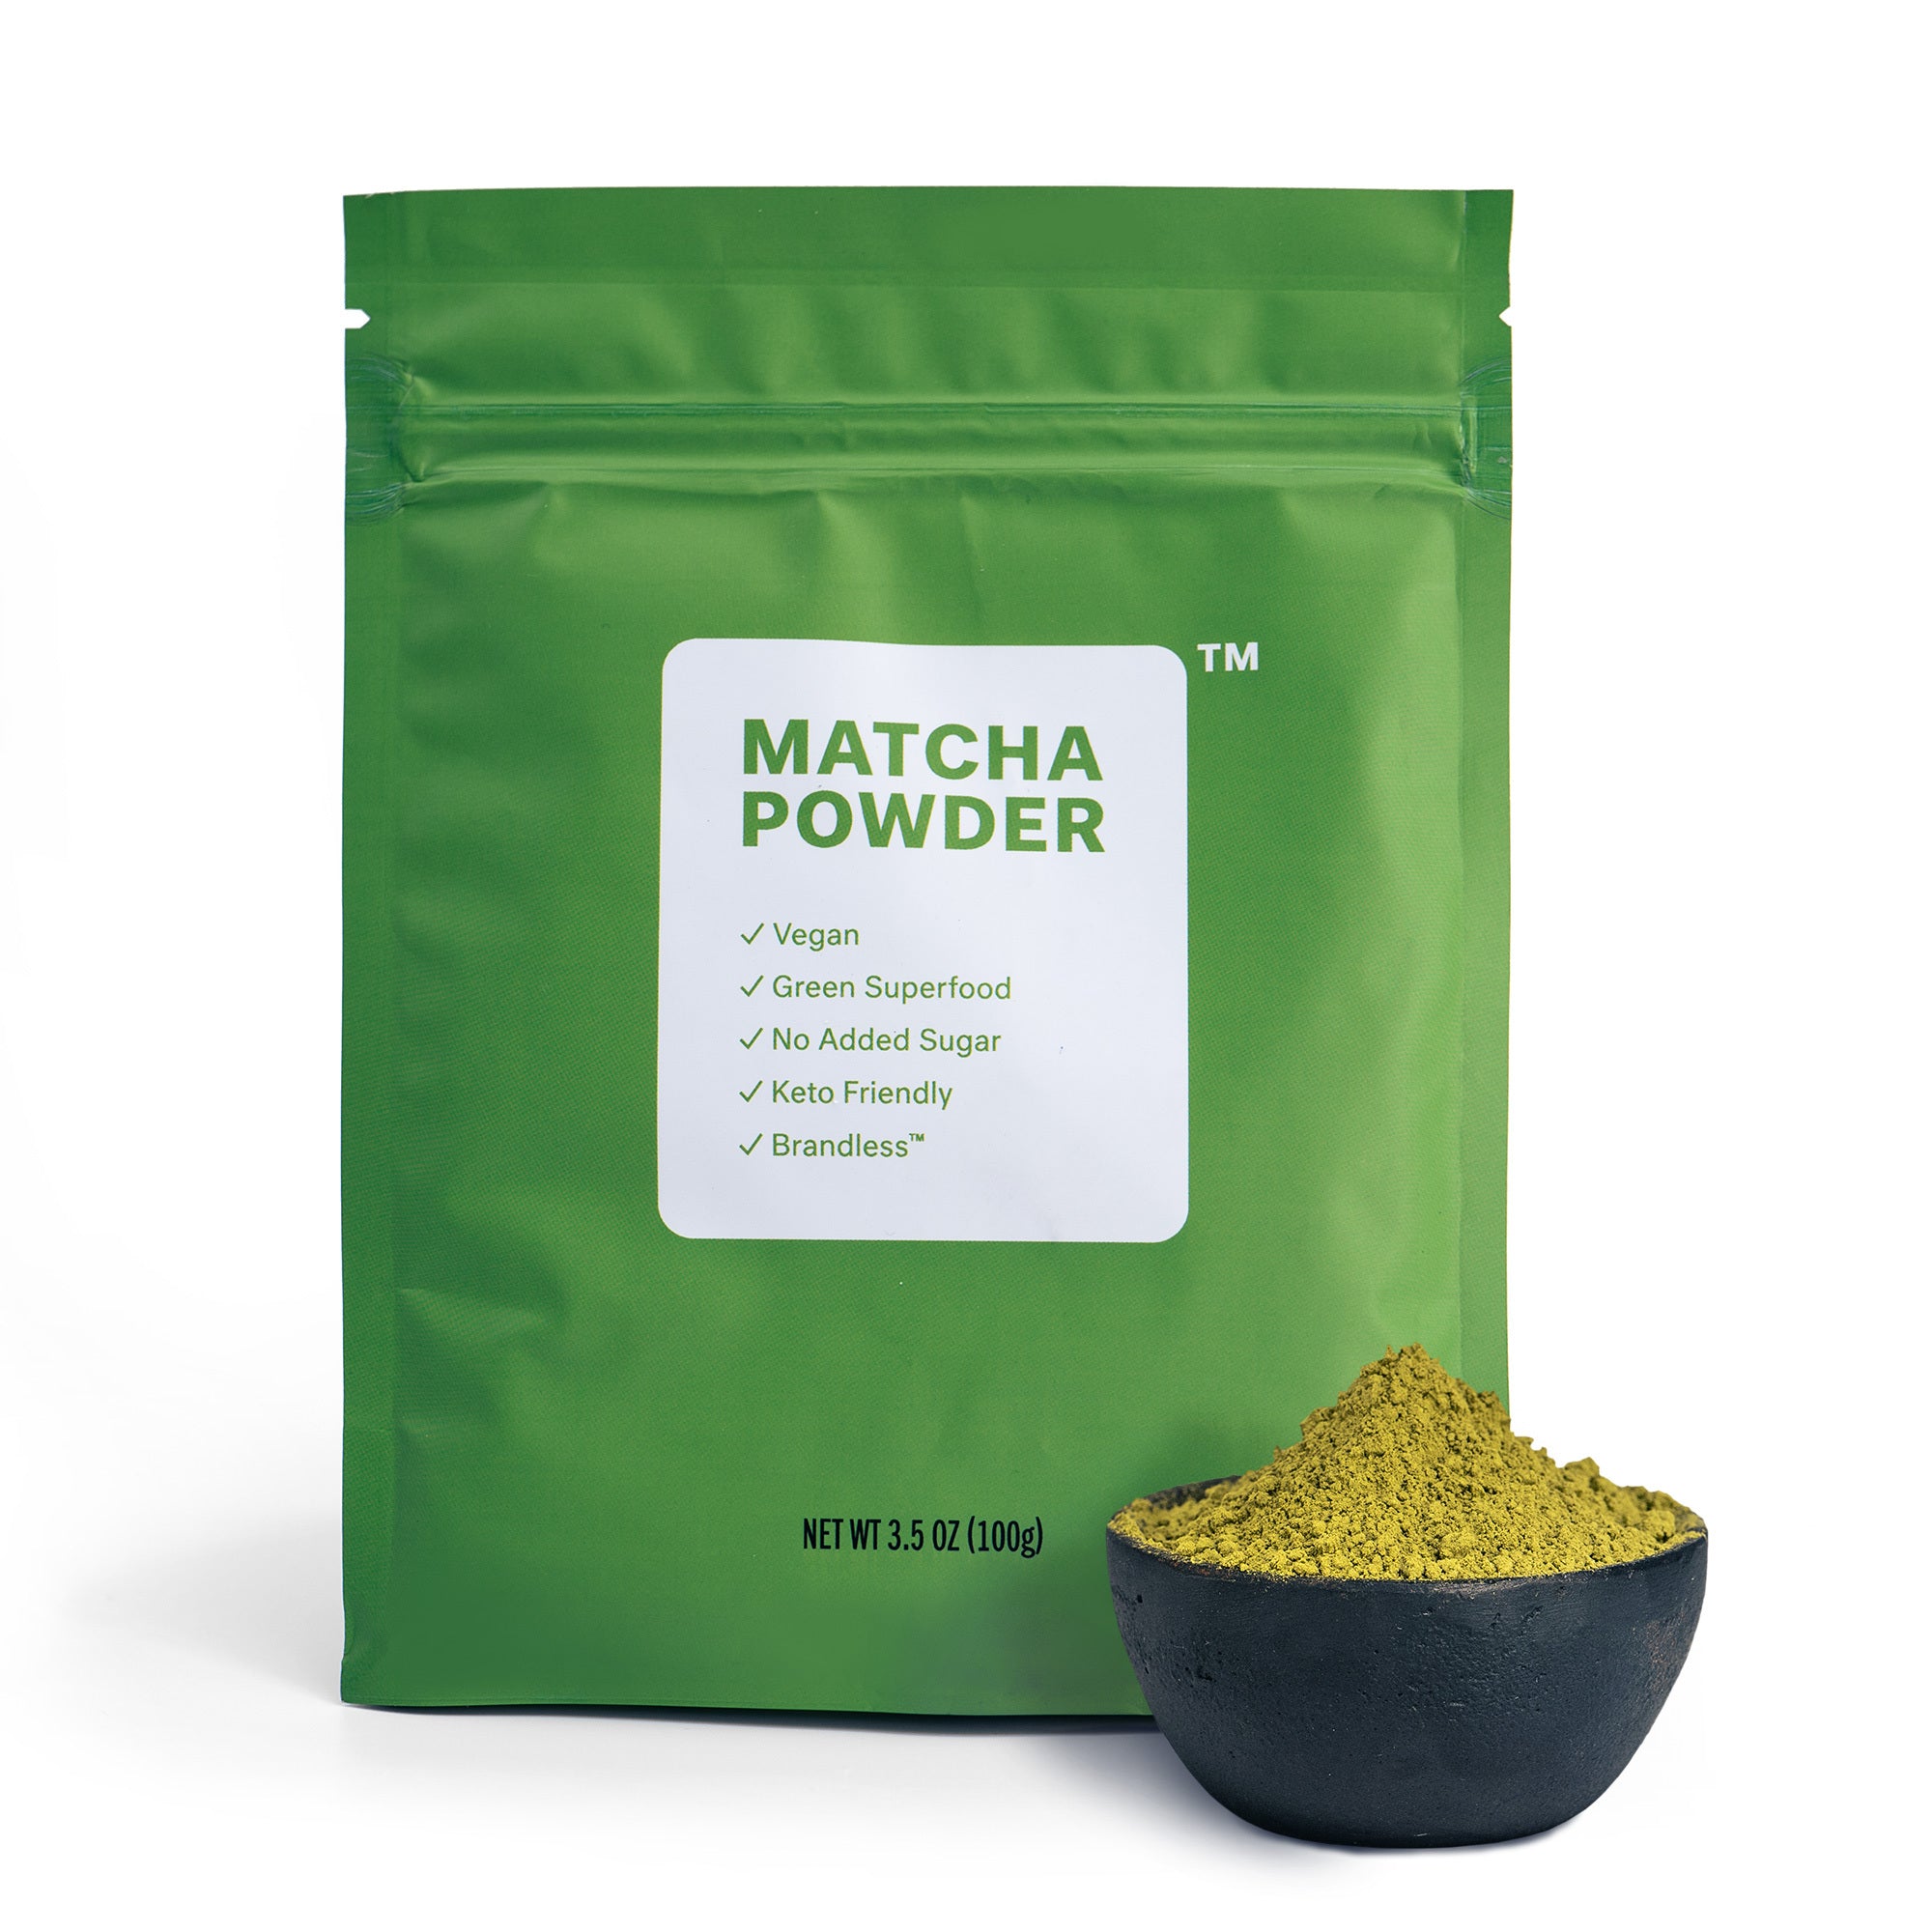 Matcha powder.  Product photo of bag with powder in bowl in foreground.  Vegan, Green Superfood, No Added Sugar, Keto Friendly, Brandless.  Net weight 3.5oz (100g).